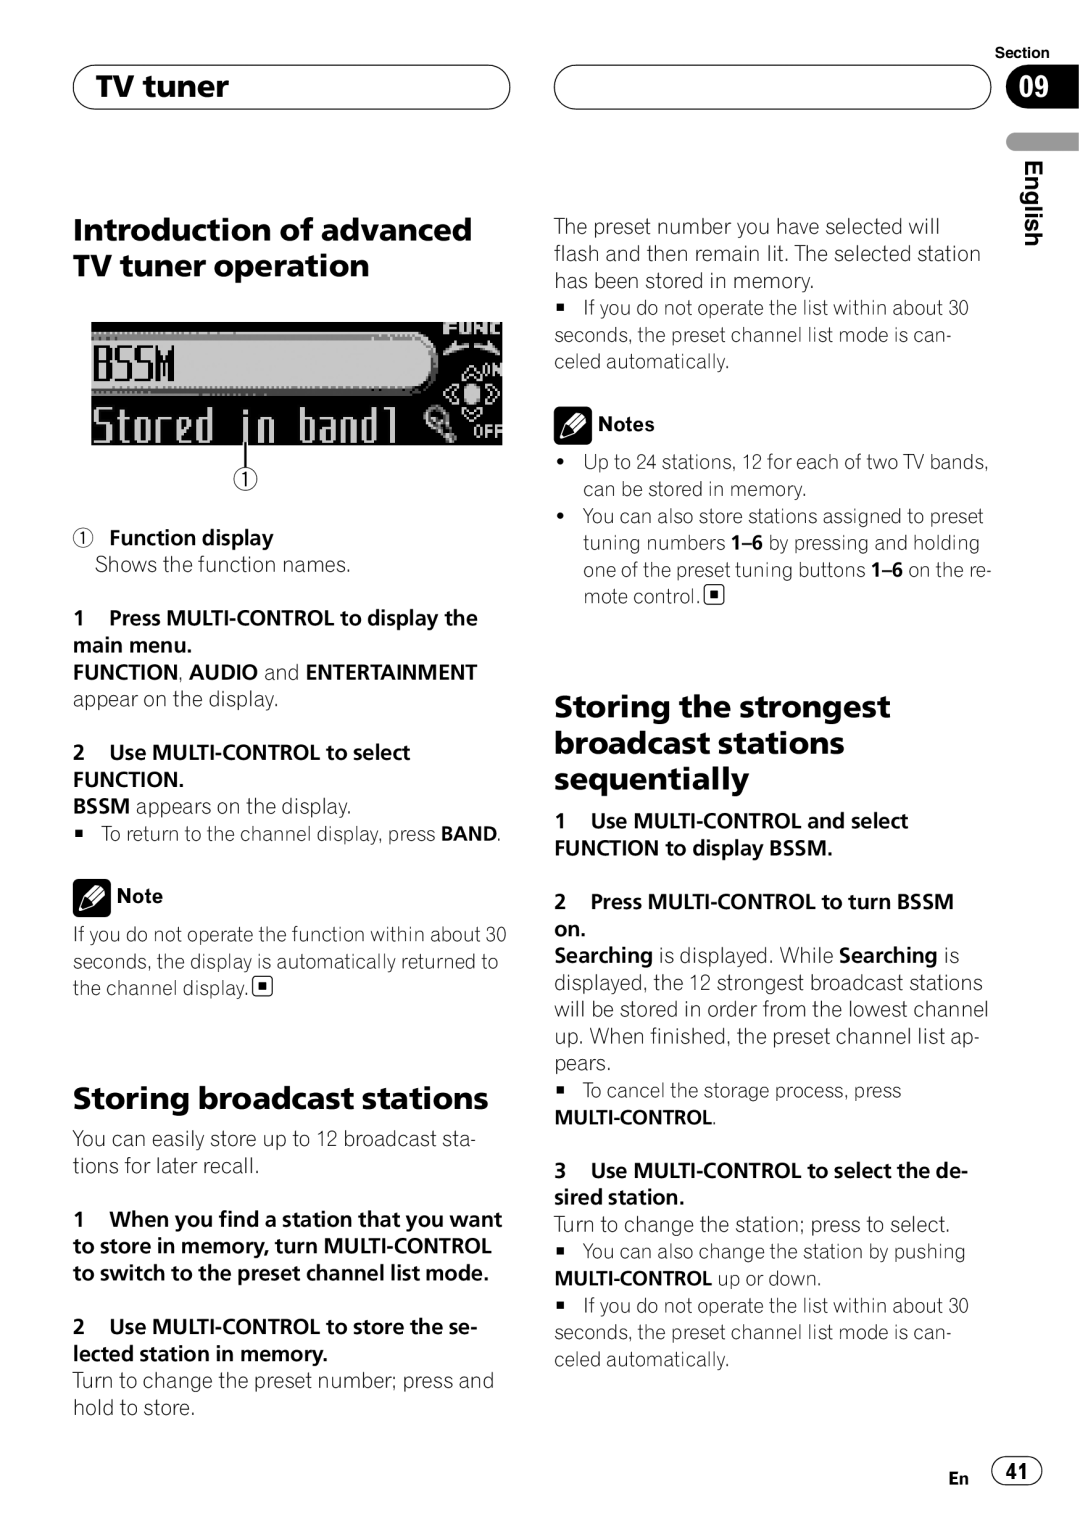 Pioneer DEH-P80RS operation manual Introduction of advanced TV tuner operation, Storing broadcast stations 